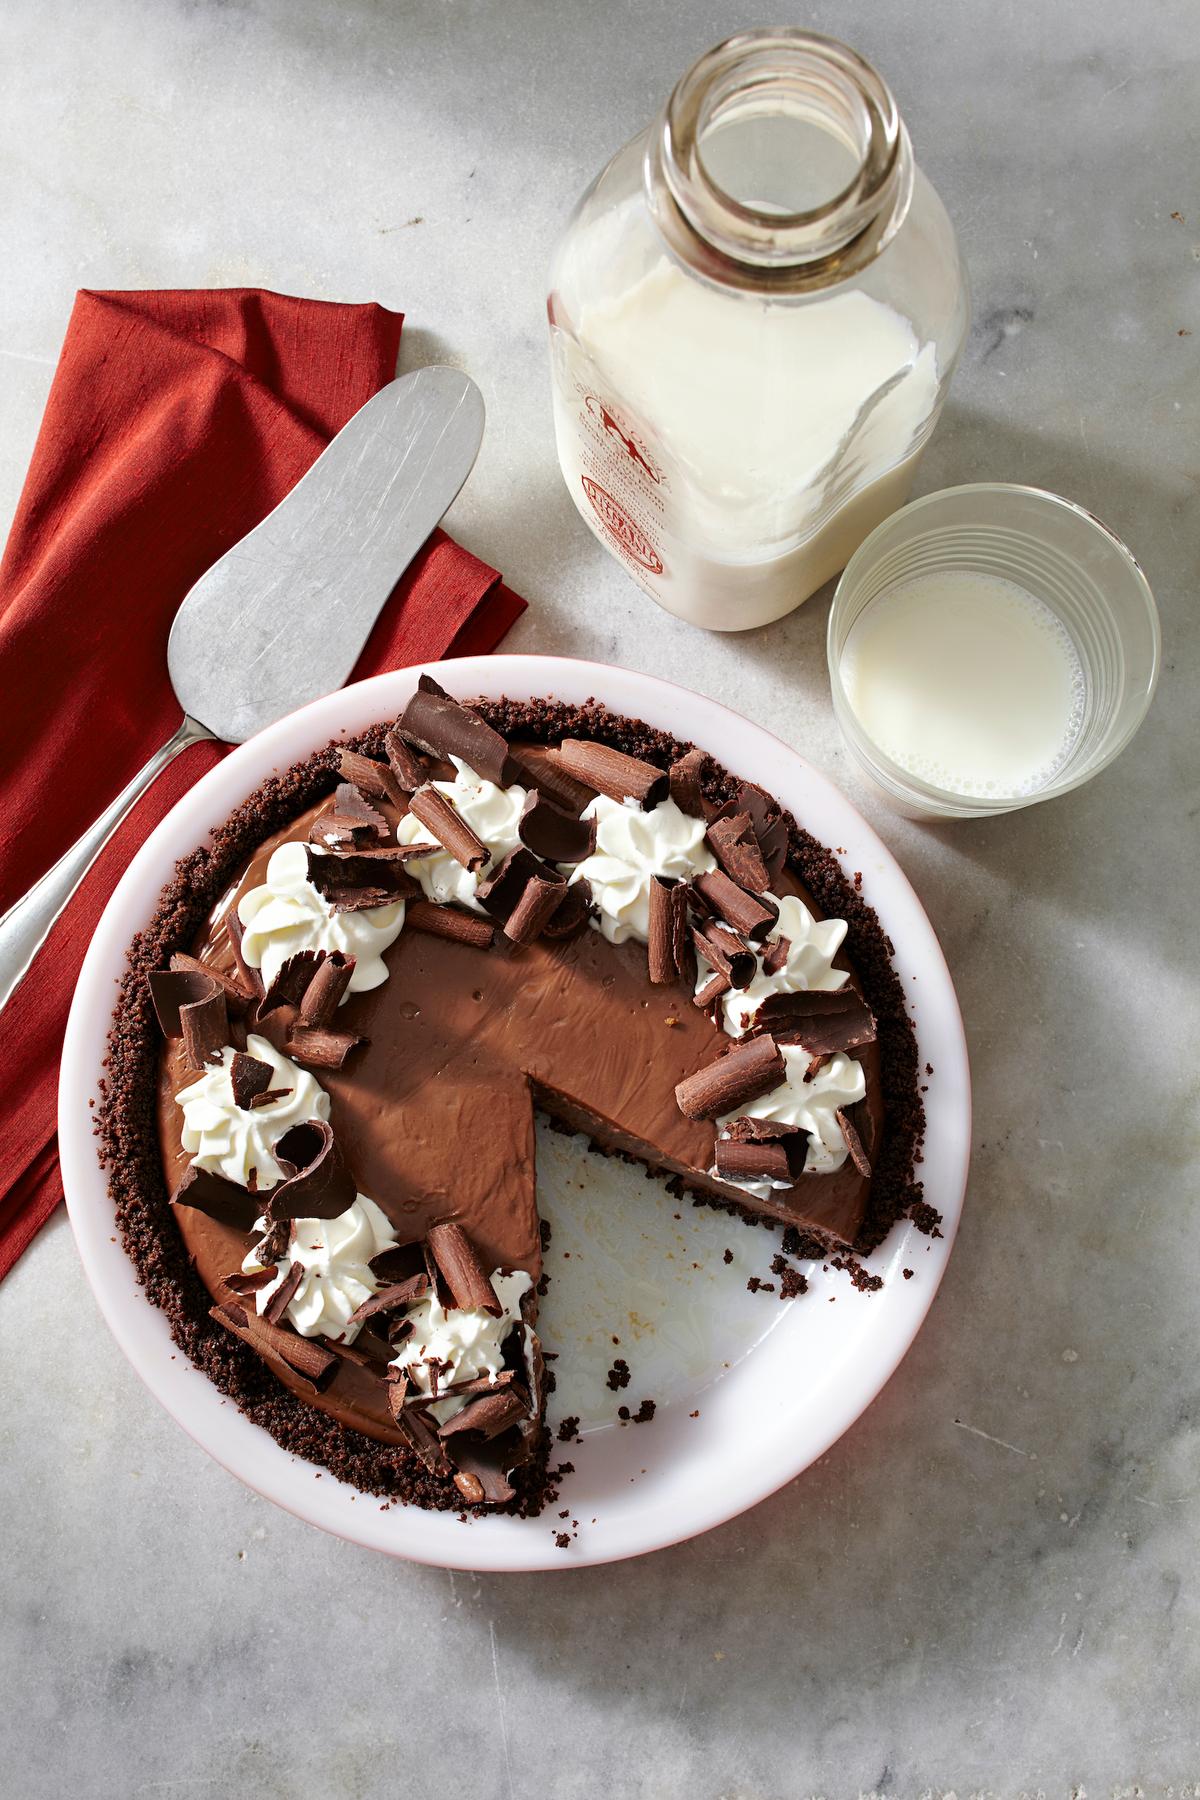 Chocolate curls add flair to this festive dessert. (Peter Ardito/TNS)